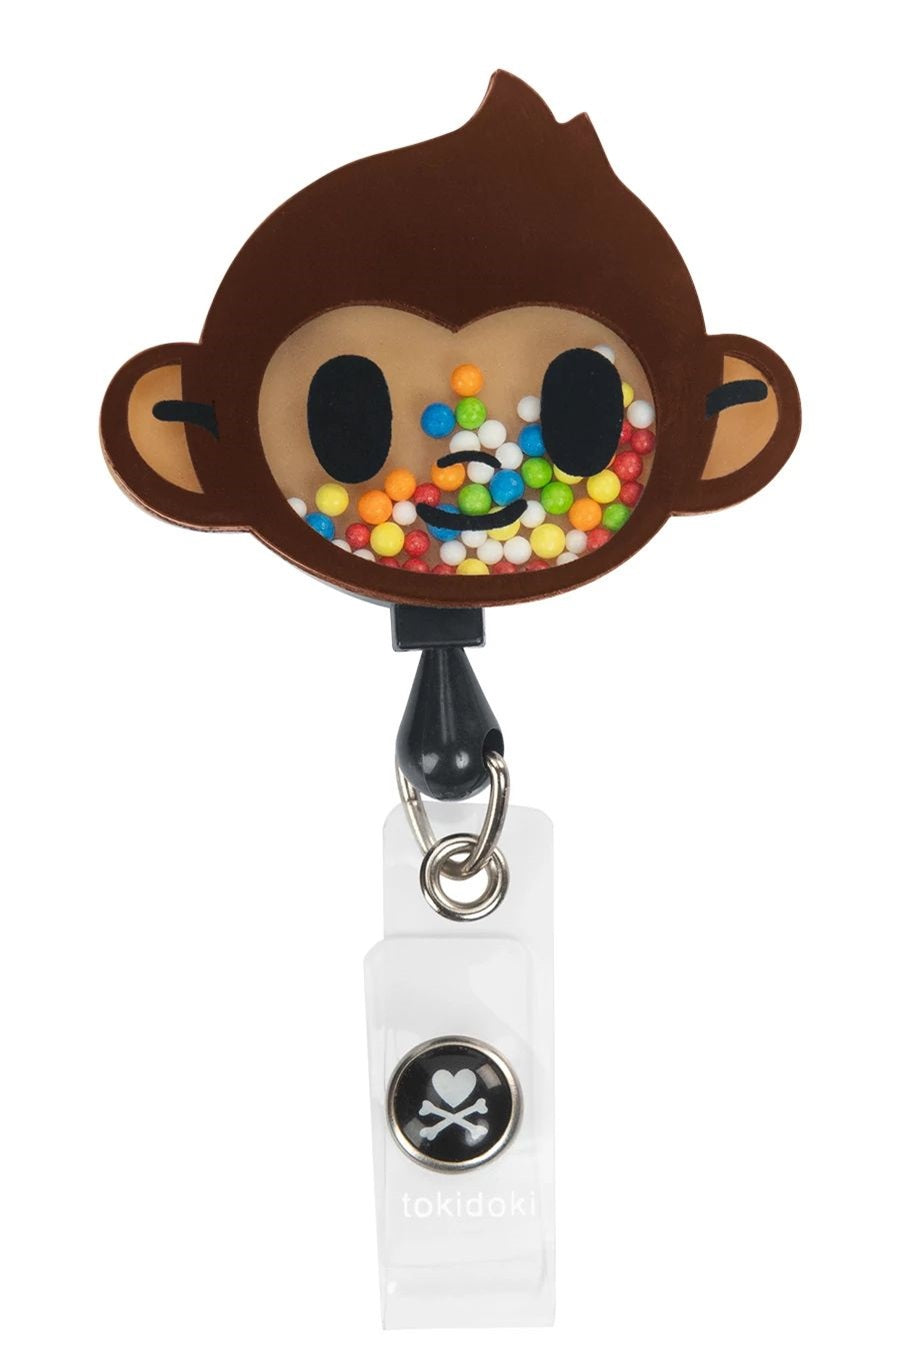 Koi Tokidoki Monkey Shaker Badge Reel with retractable cord and snap badge holder at Parker's Clothing and Shoes.